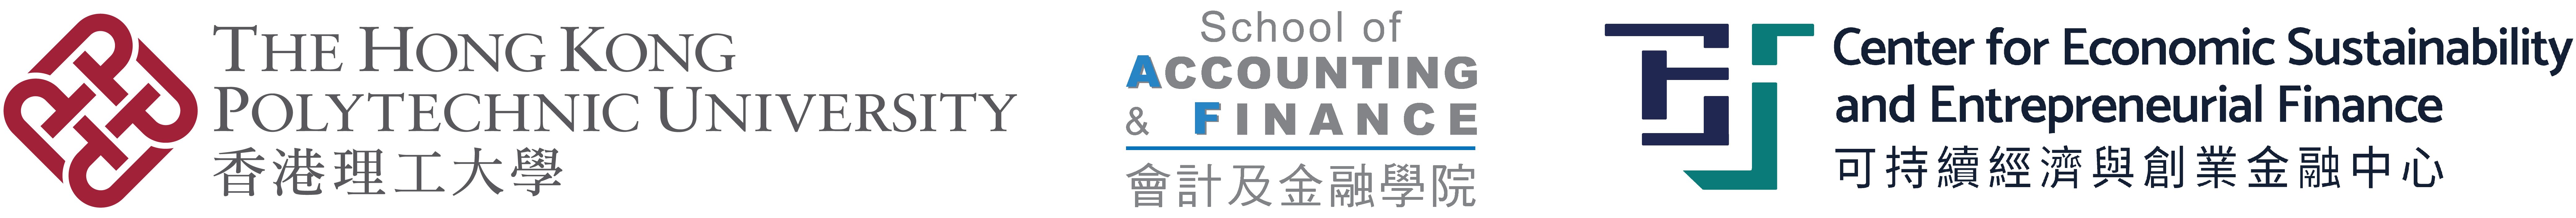 Center for Economic Sustainability and Entrepreneurial Finance